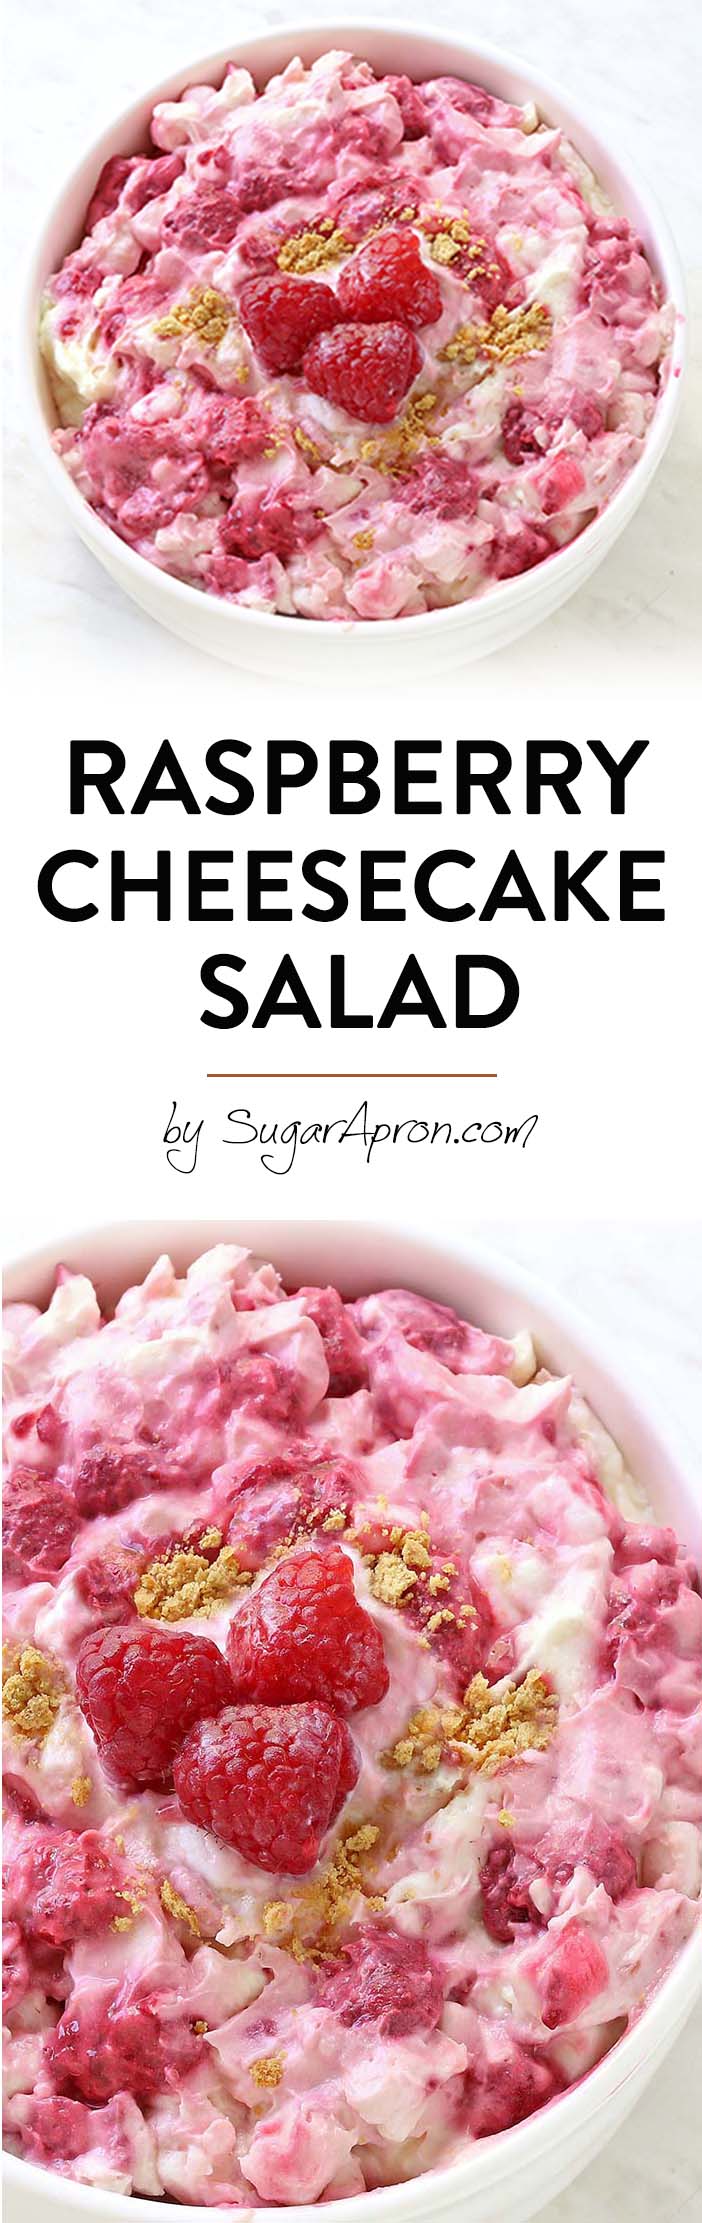 This isn’t any old Fluff Salad recipe – it’s a Raspberry Cheesecake Salad! This easy no-bake dessert salad is full of raspberries and graham crackers and is the perfect alternative to traditional fluff salad.